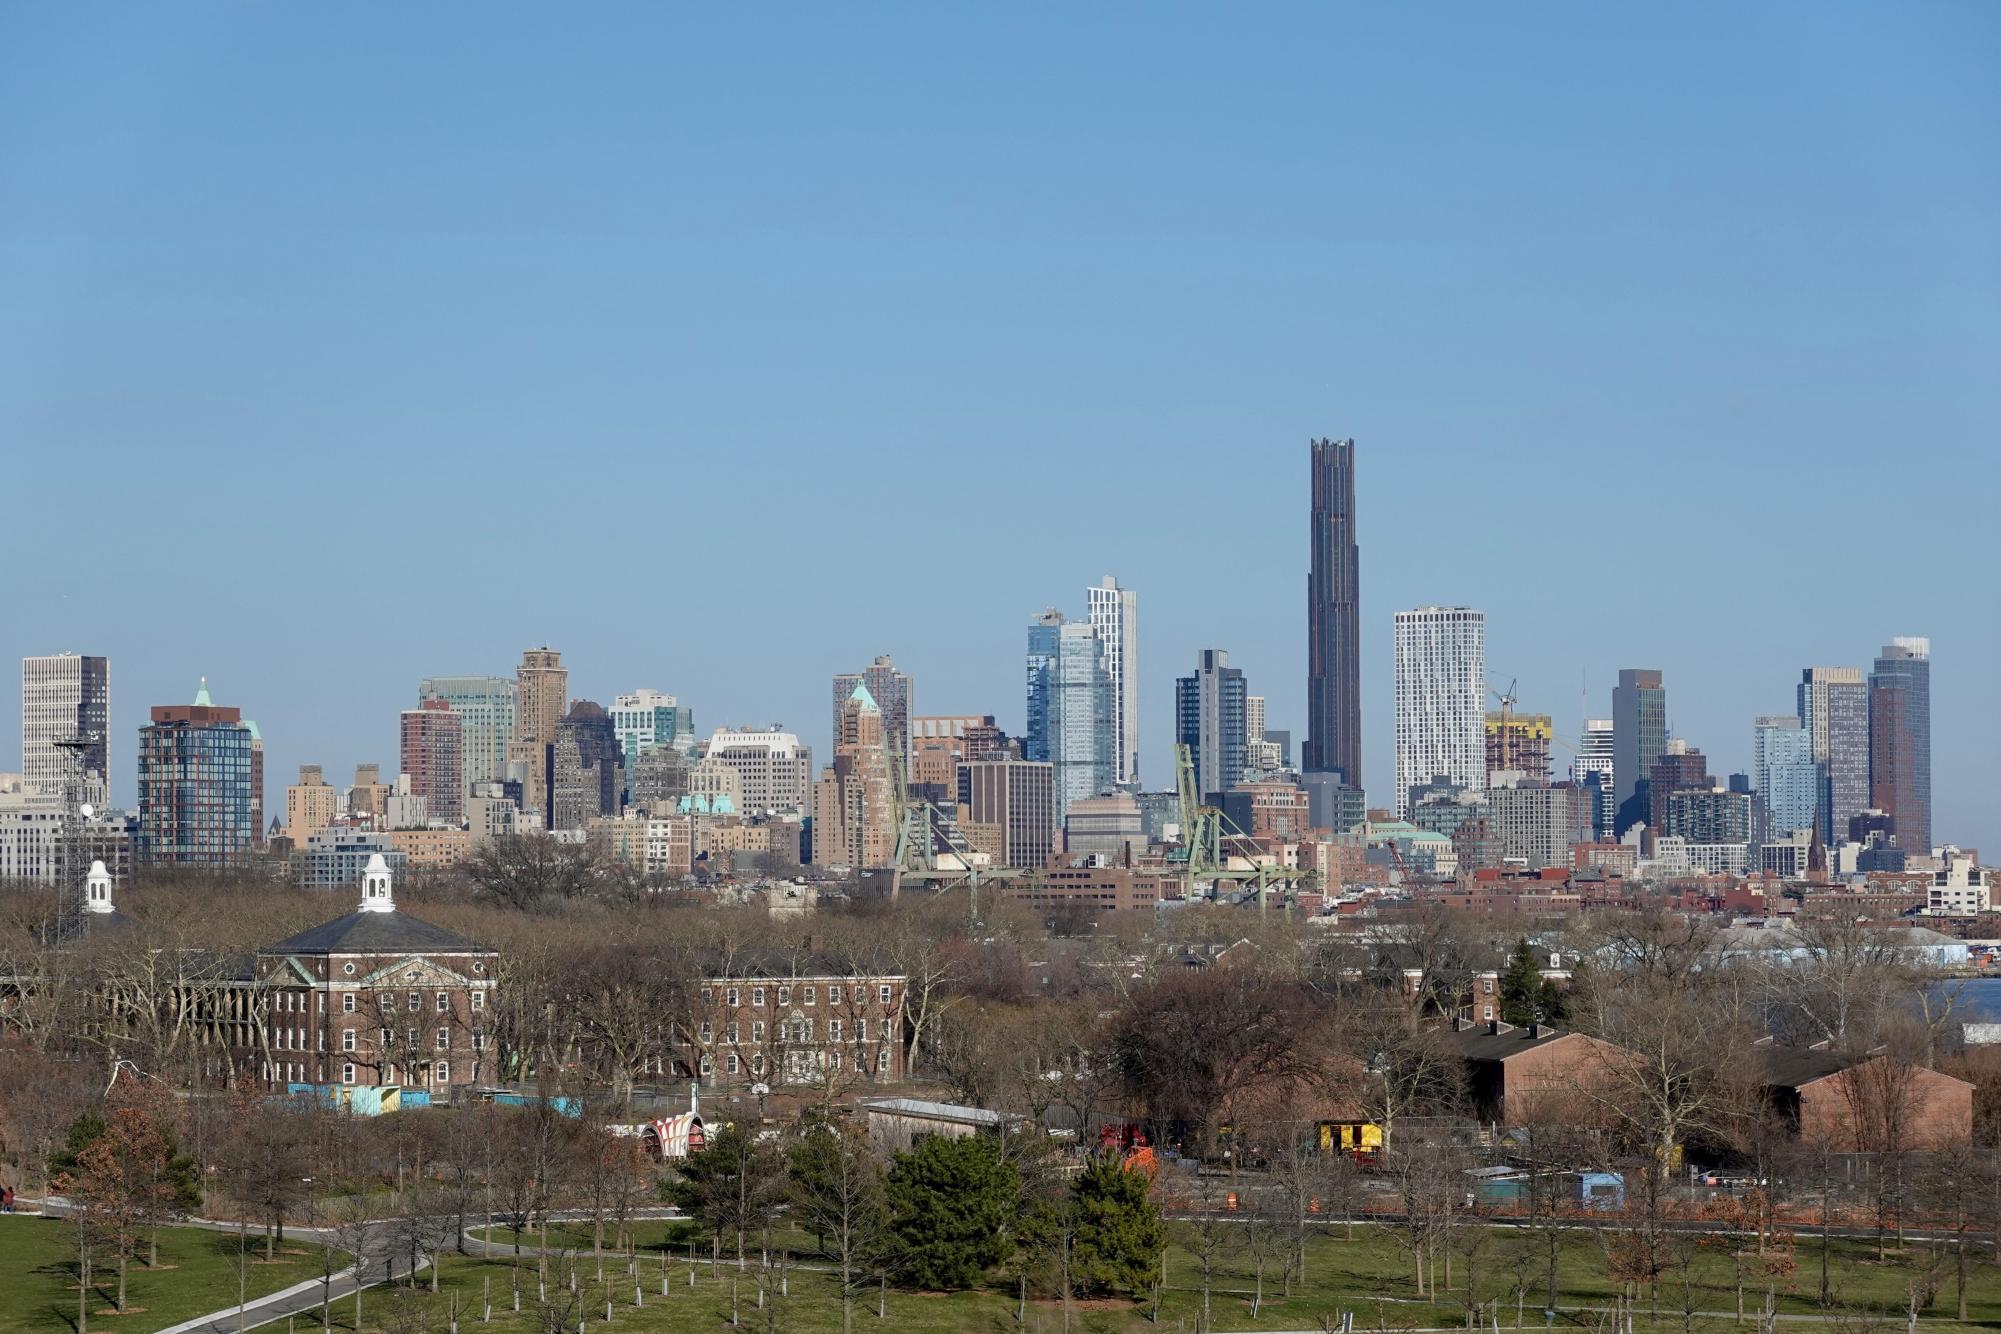 A view of the New York City skyline from Governors Island.